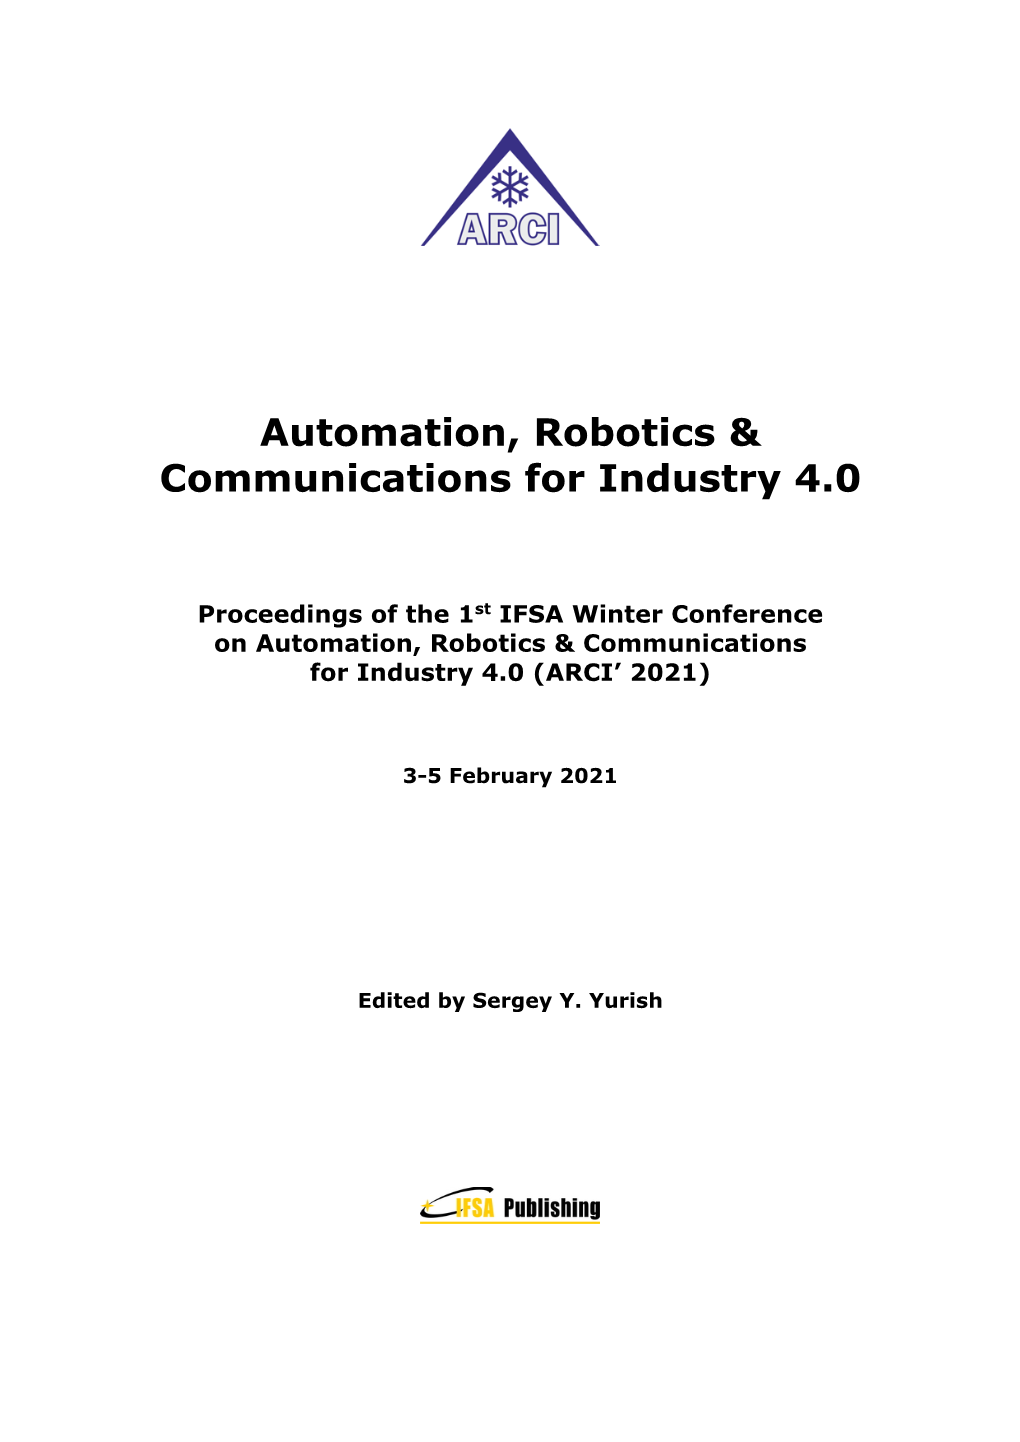 Automation, Robotics & Communications for Industry